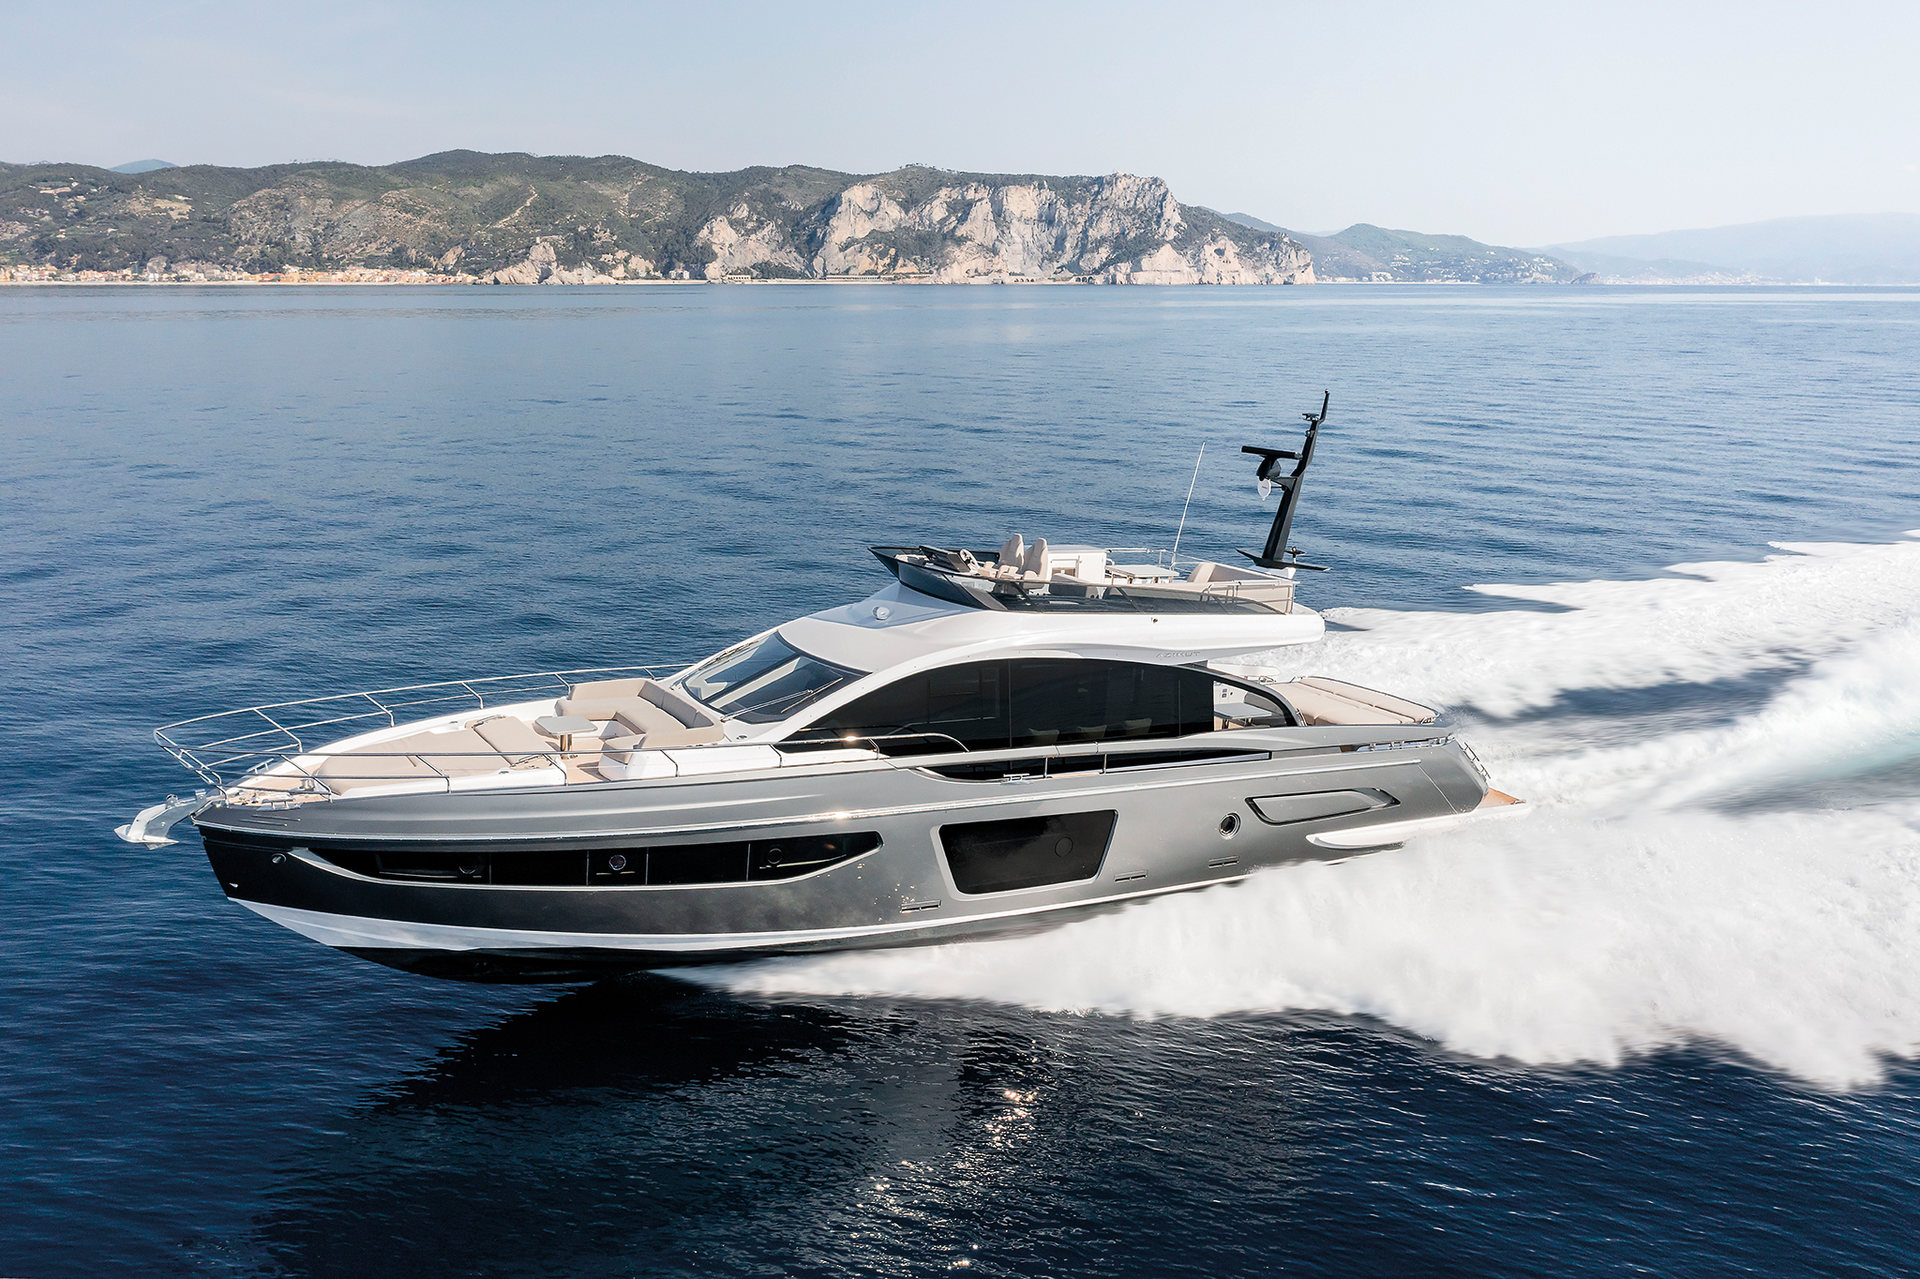 360 VR Virtual Tours of the Azimut S7